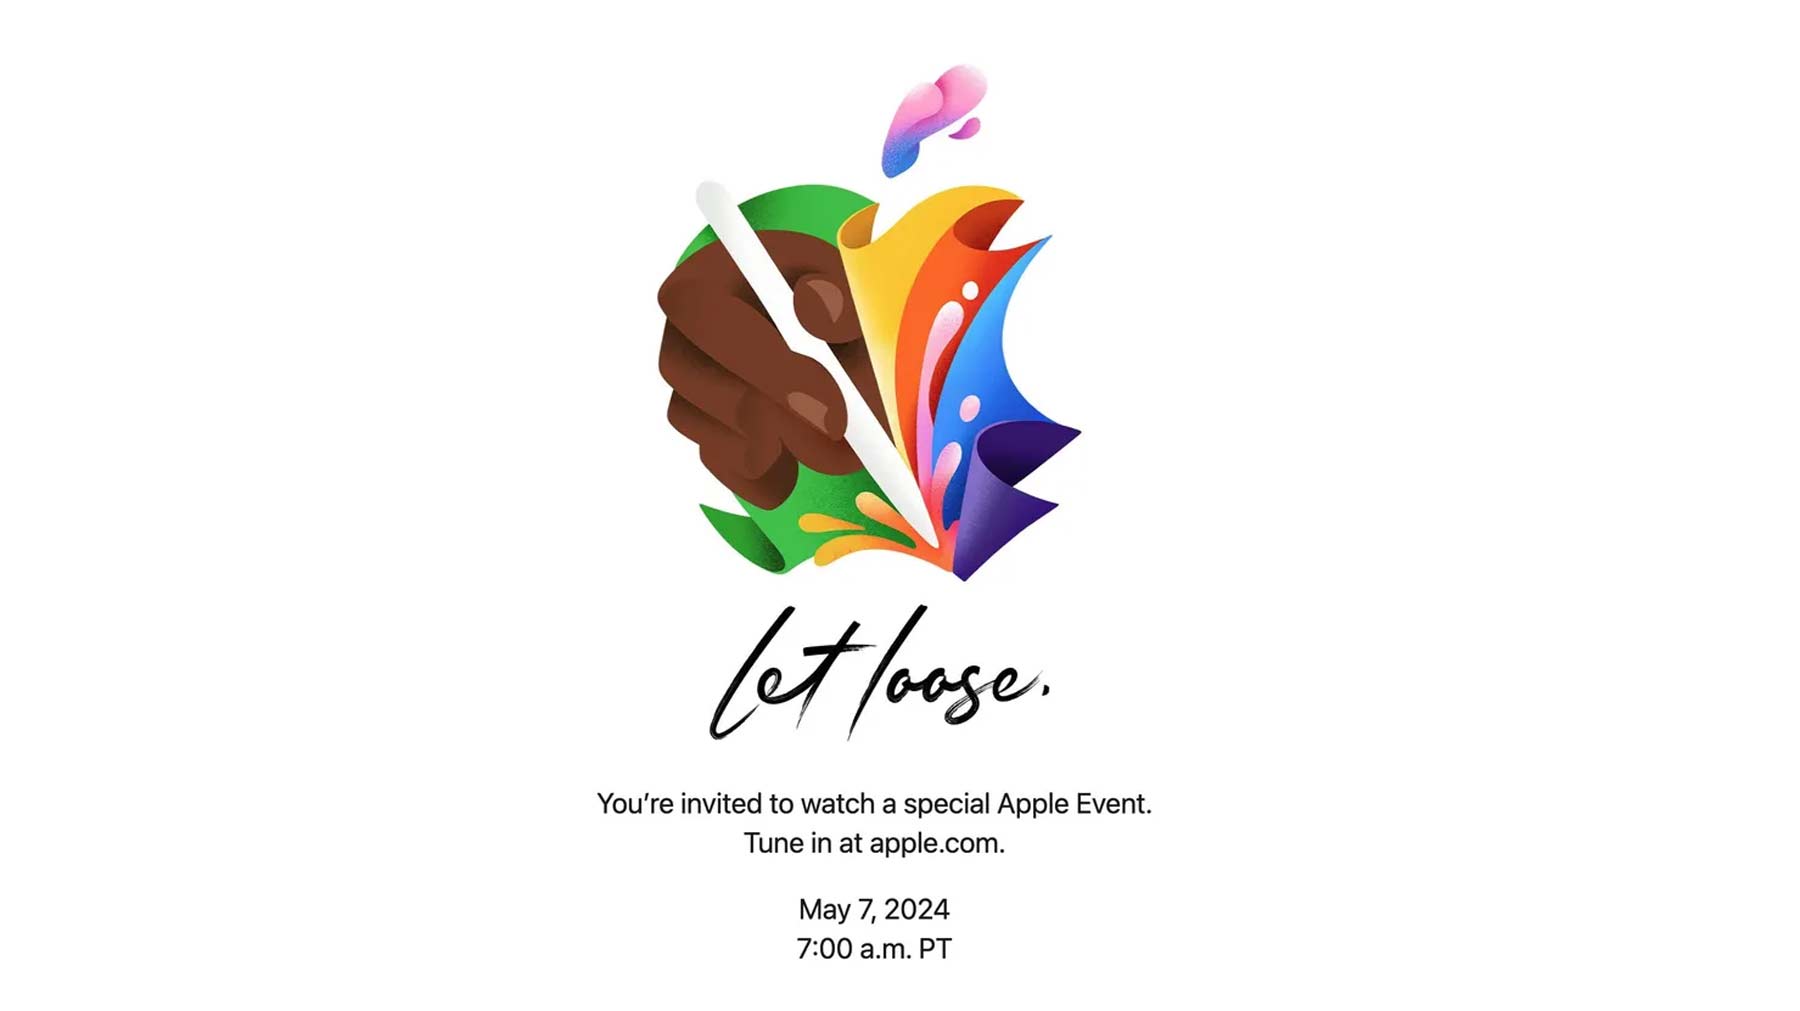 Apple Sets Date for Major iPad Event on May 7th